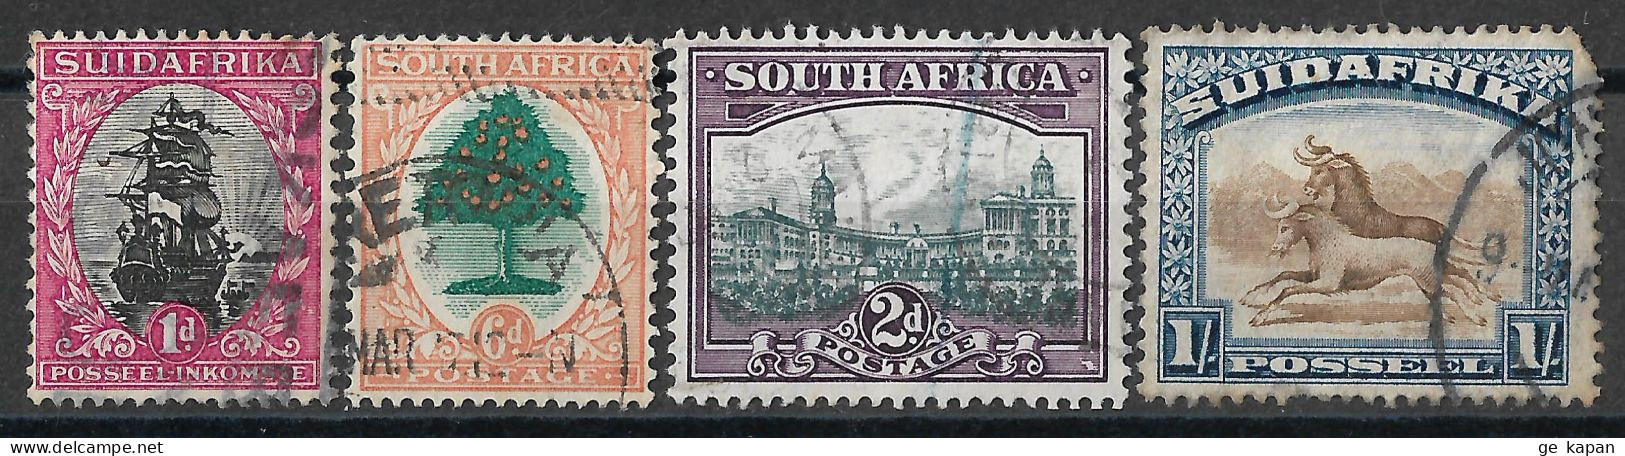 1926-1931 SOUTH AFRICA Set Of 4 USED STAMPS (Scott # 24b,25a,36a,43b) CV $3.95 - Gebraucht